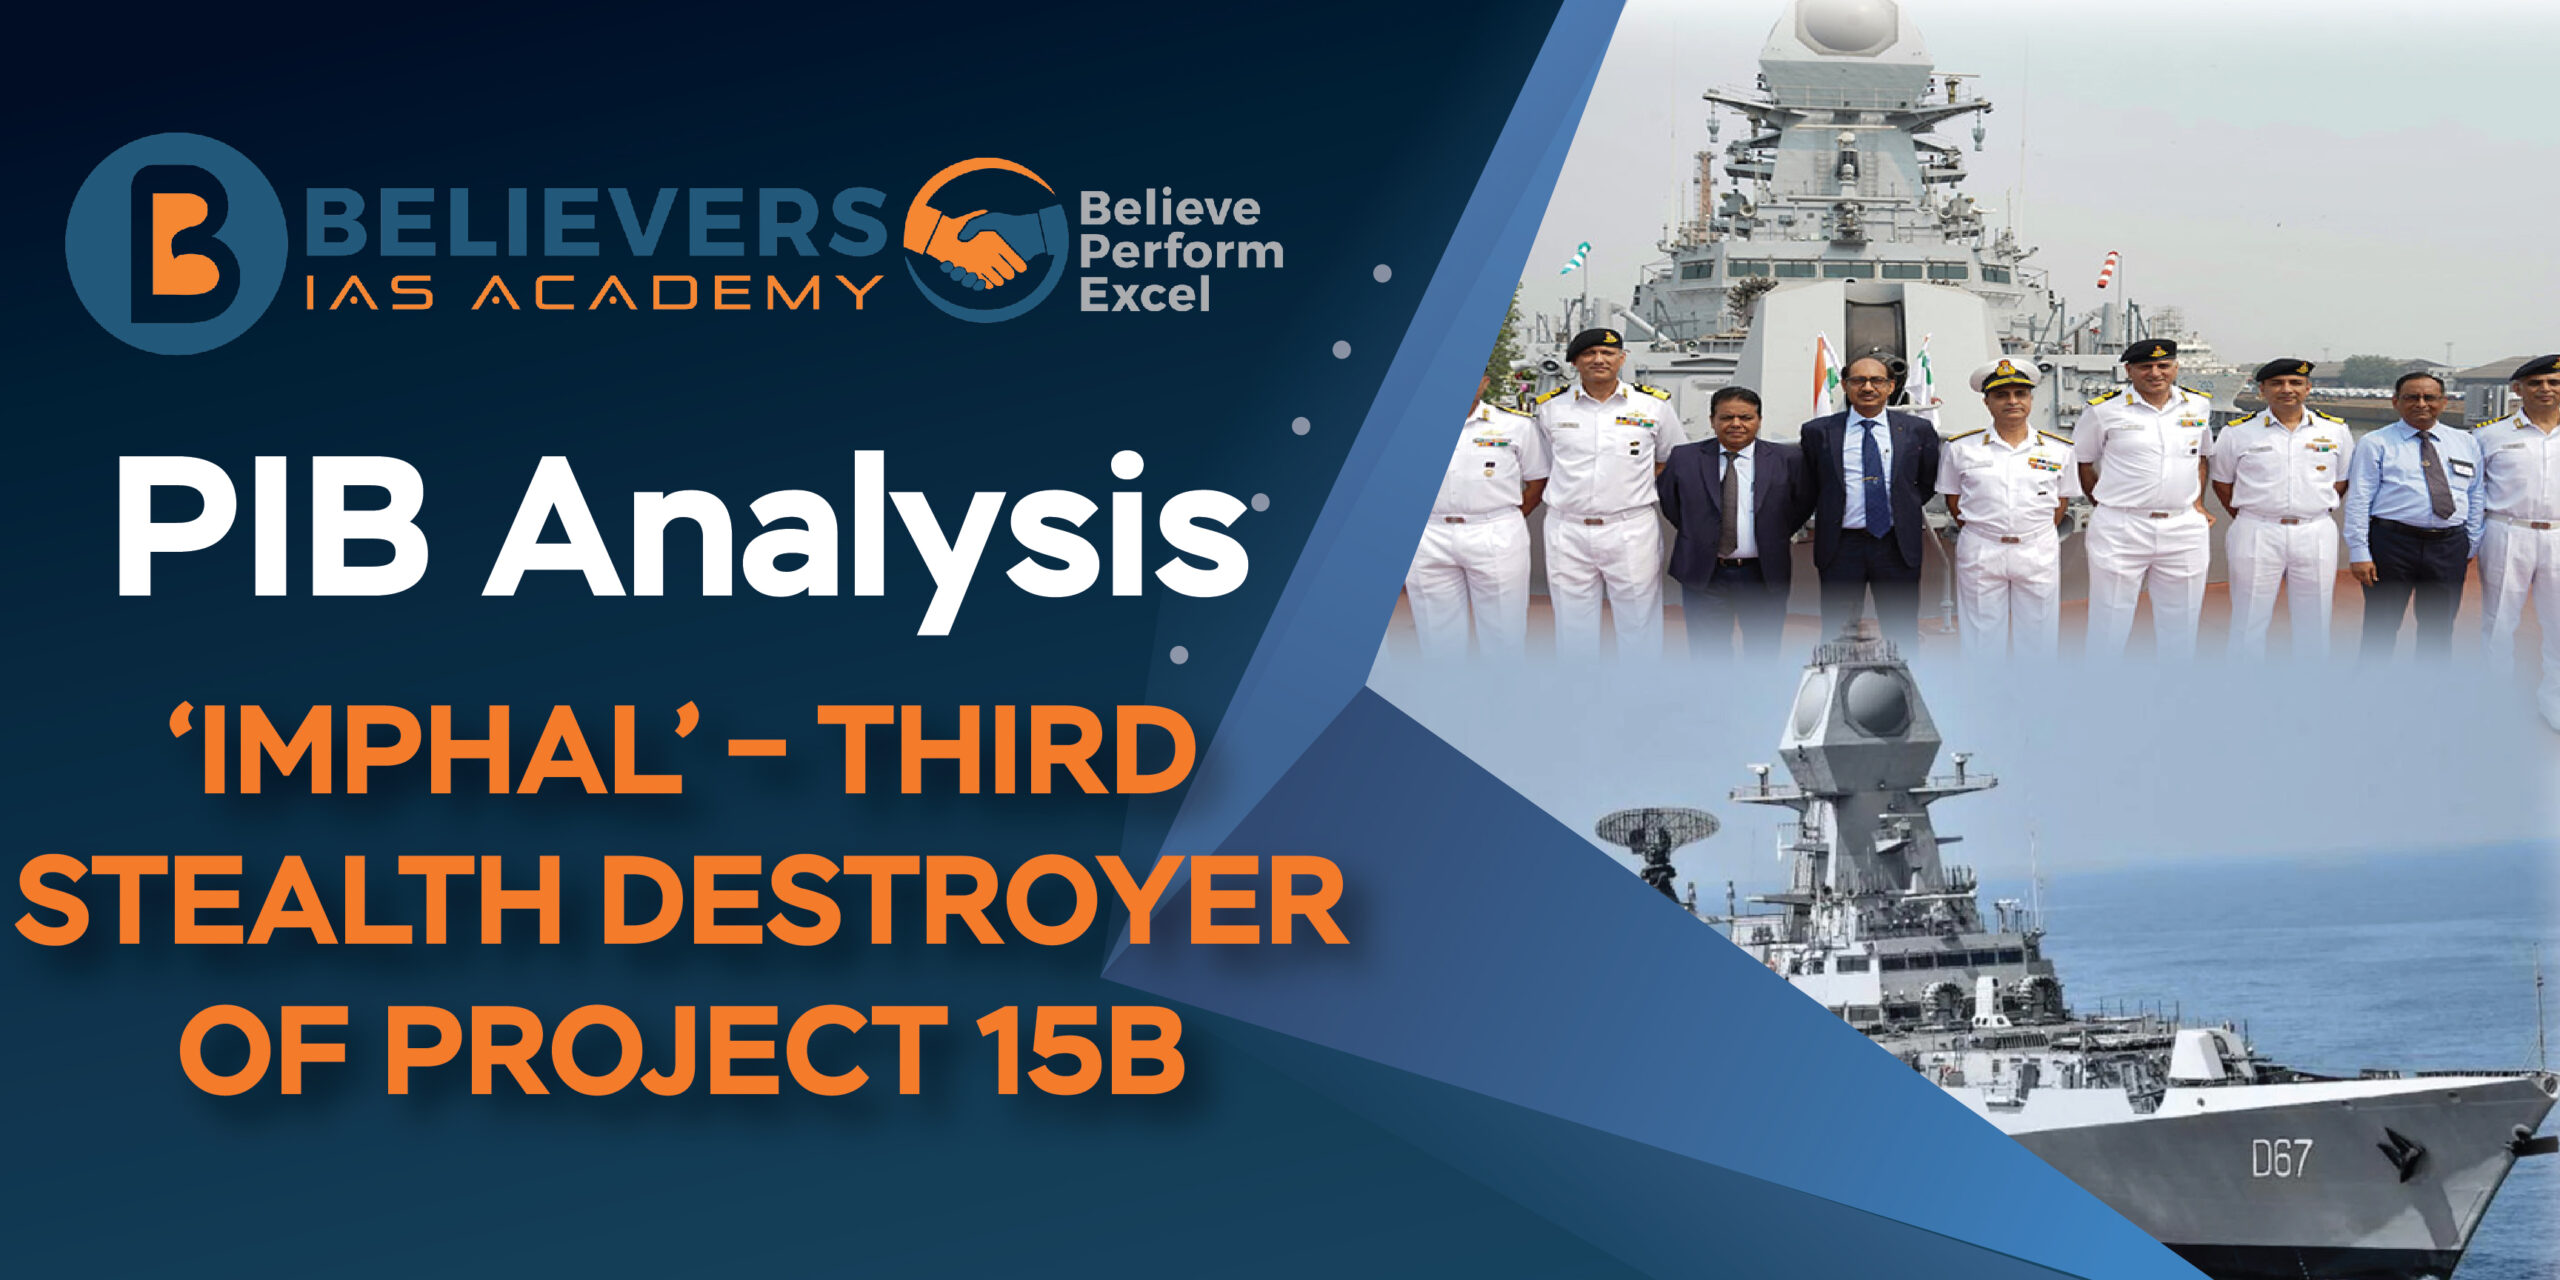 IMPHAL_ThIRD STAELTH DESTROYER OF PROJECT 15B